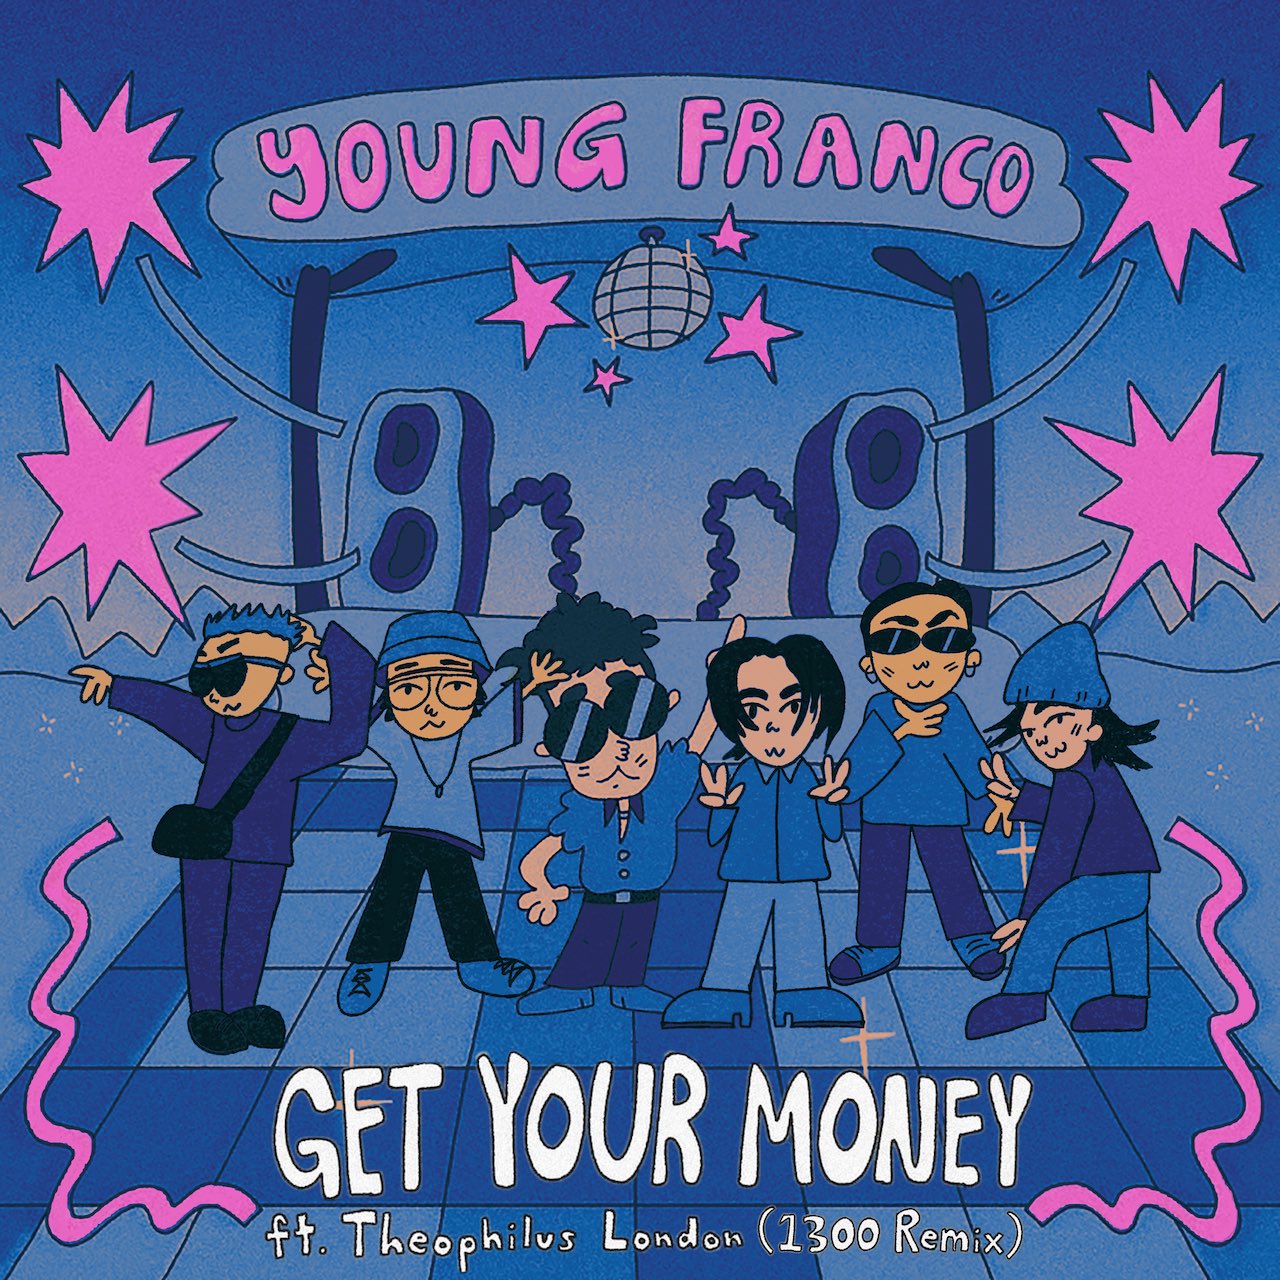 Young Franco Recruits 1300 For Remix Of 'Get Your Money'